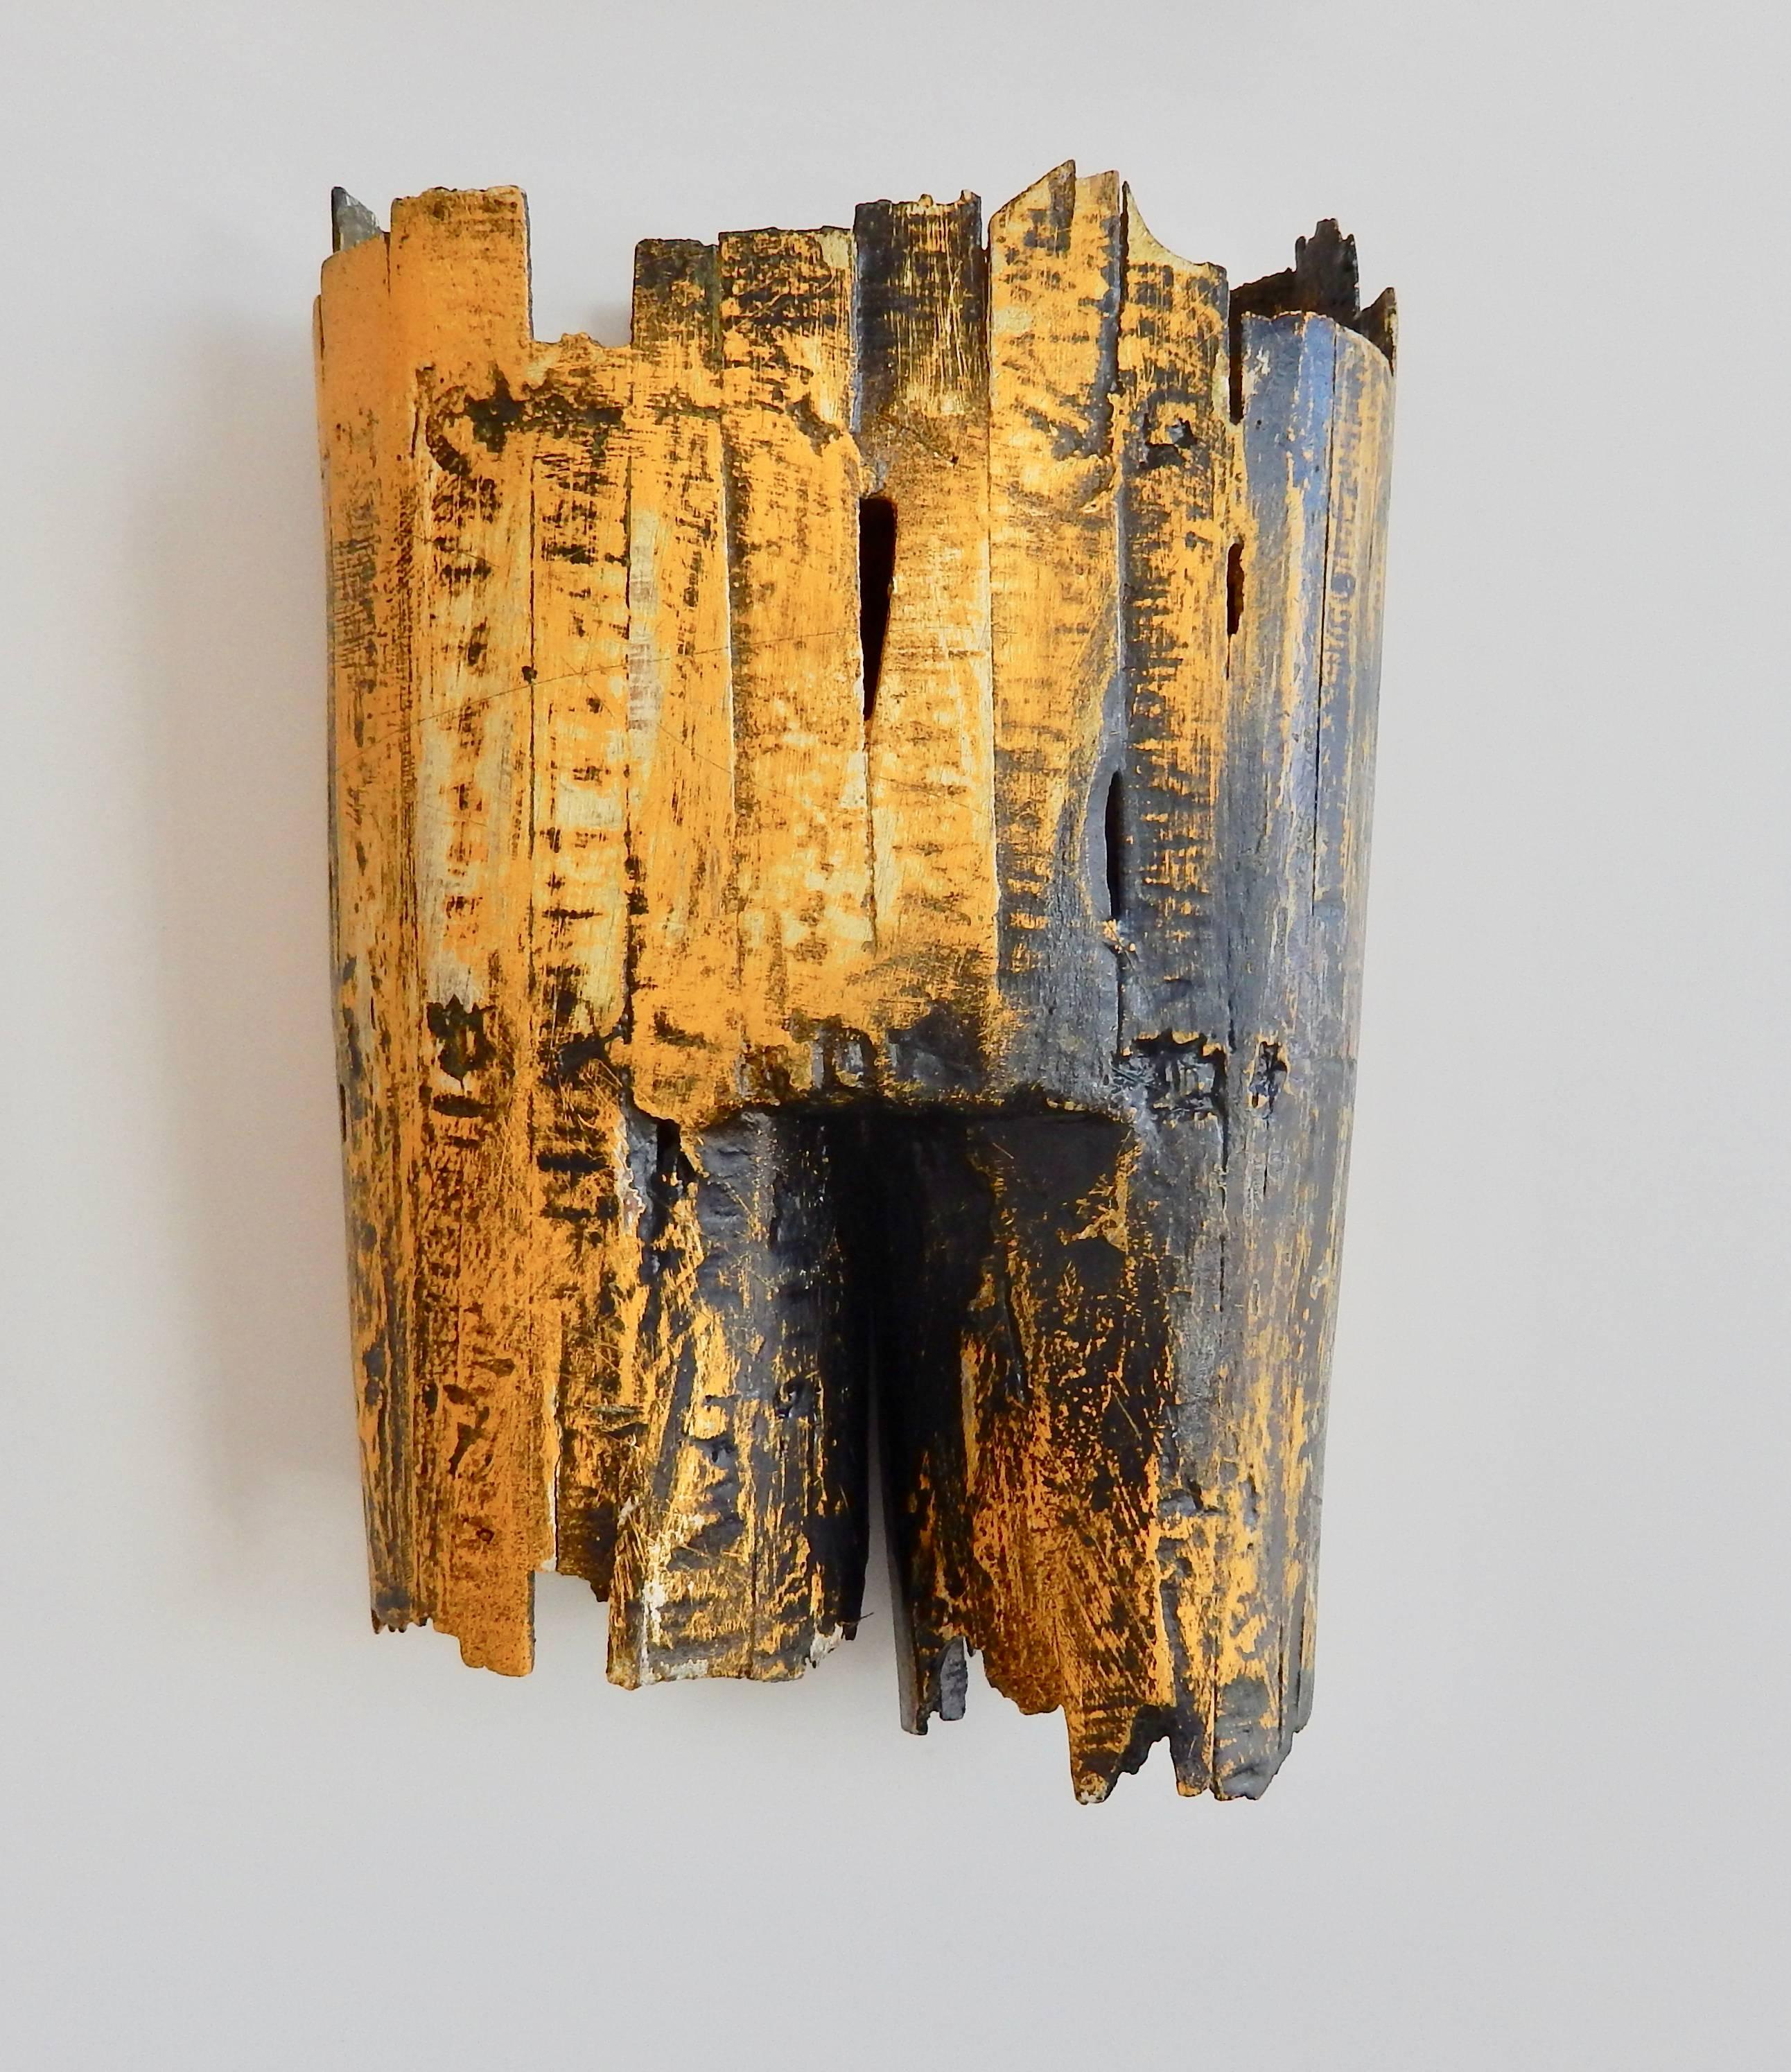 A constructed and painted wood sculpture titled 